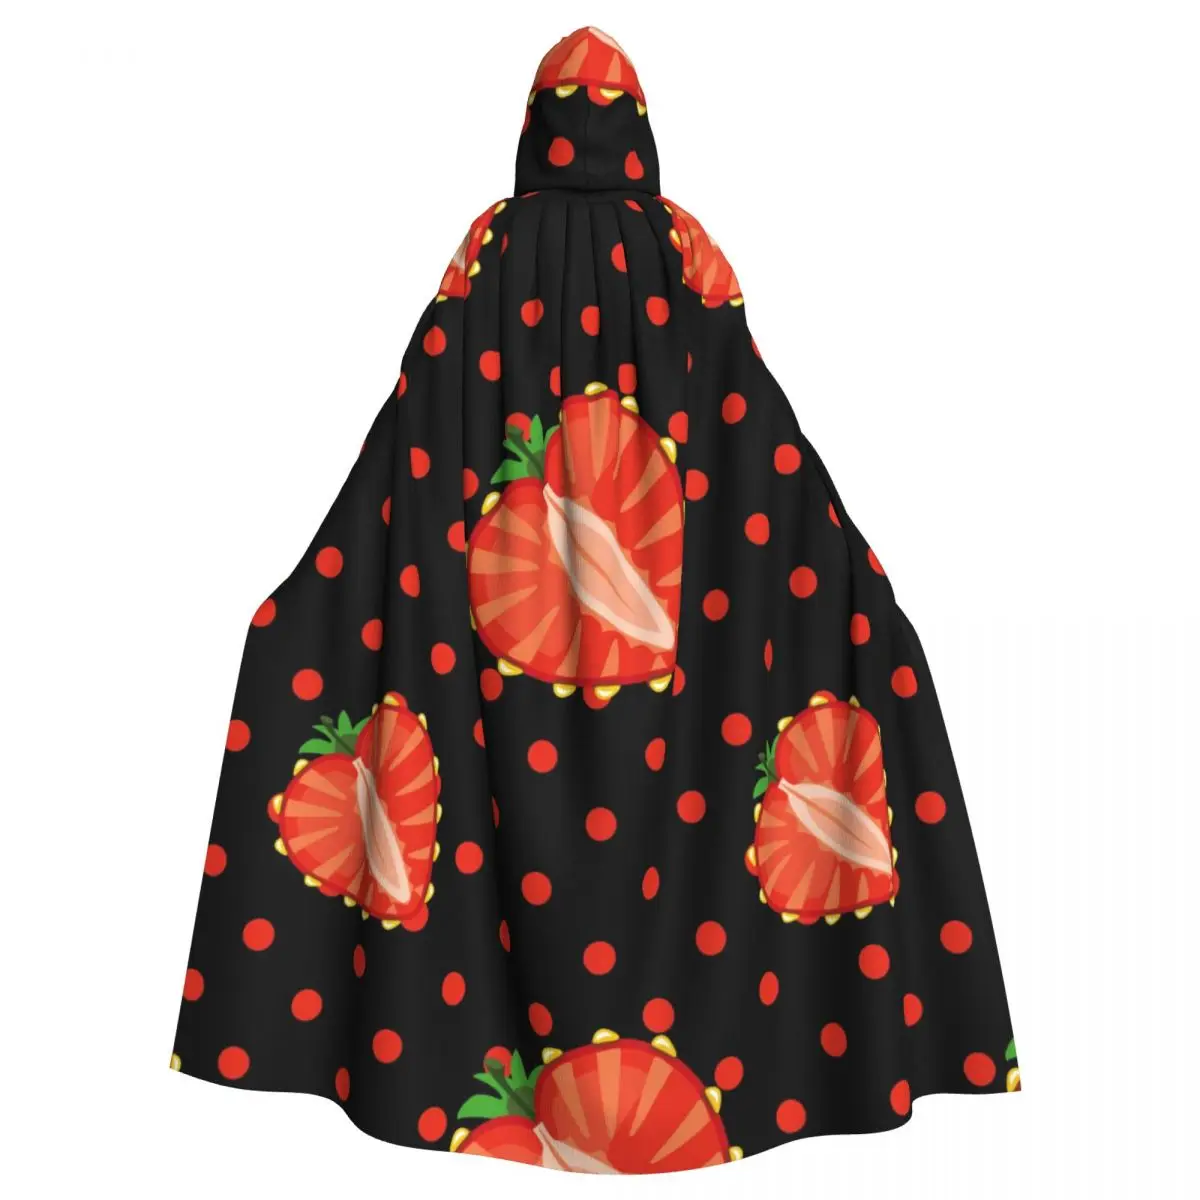 

Hooded Cloak Unisex Cloak with Hood Heart Of Strawberry Berries And Polka Dot Pattern Cloak Vampire Witch Cape Cosplay Costume